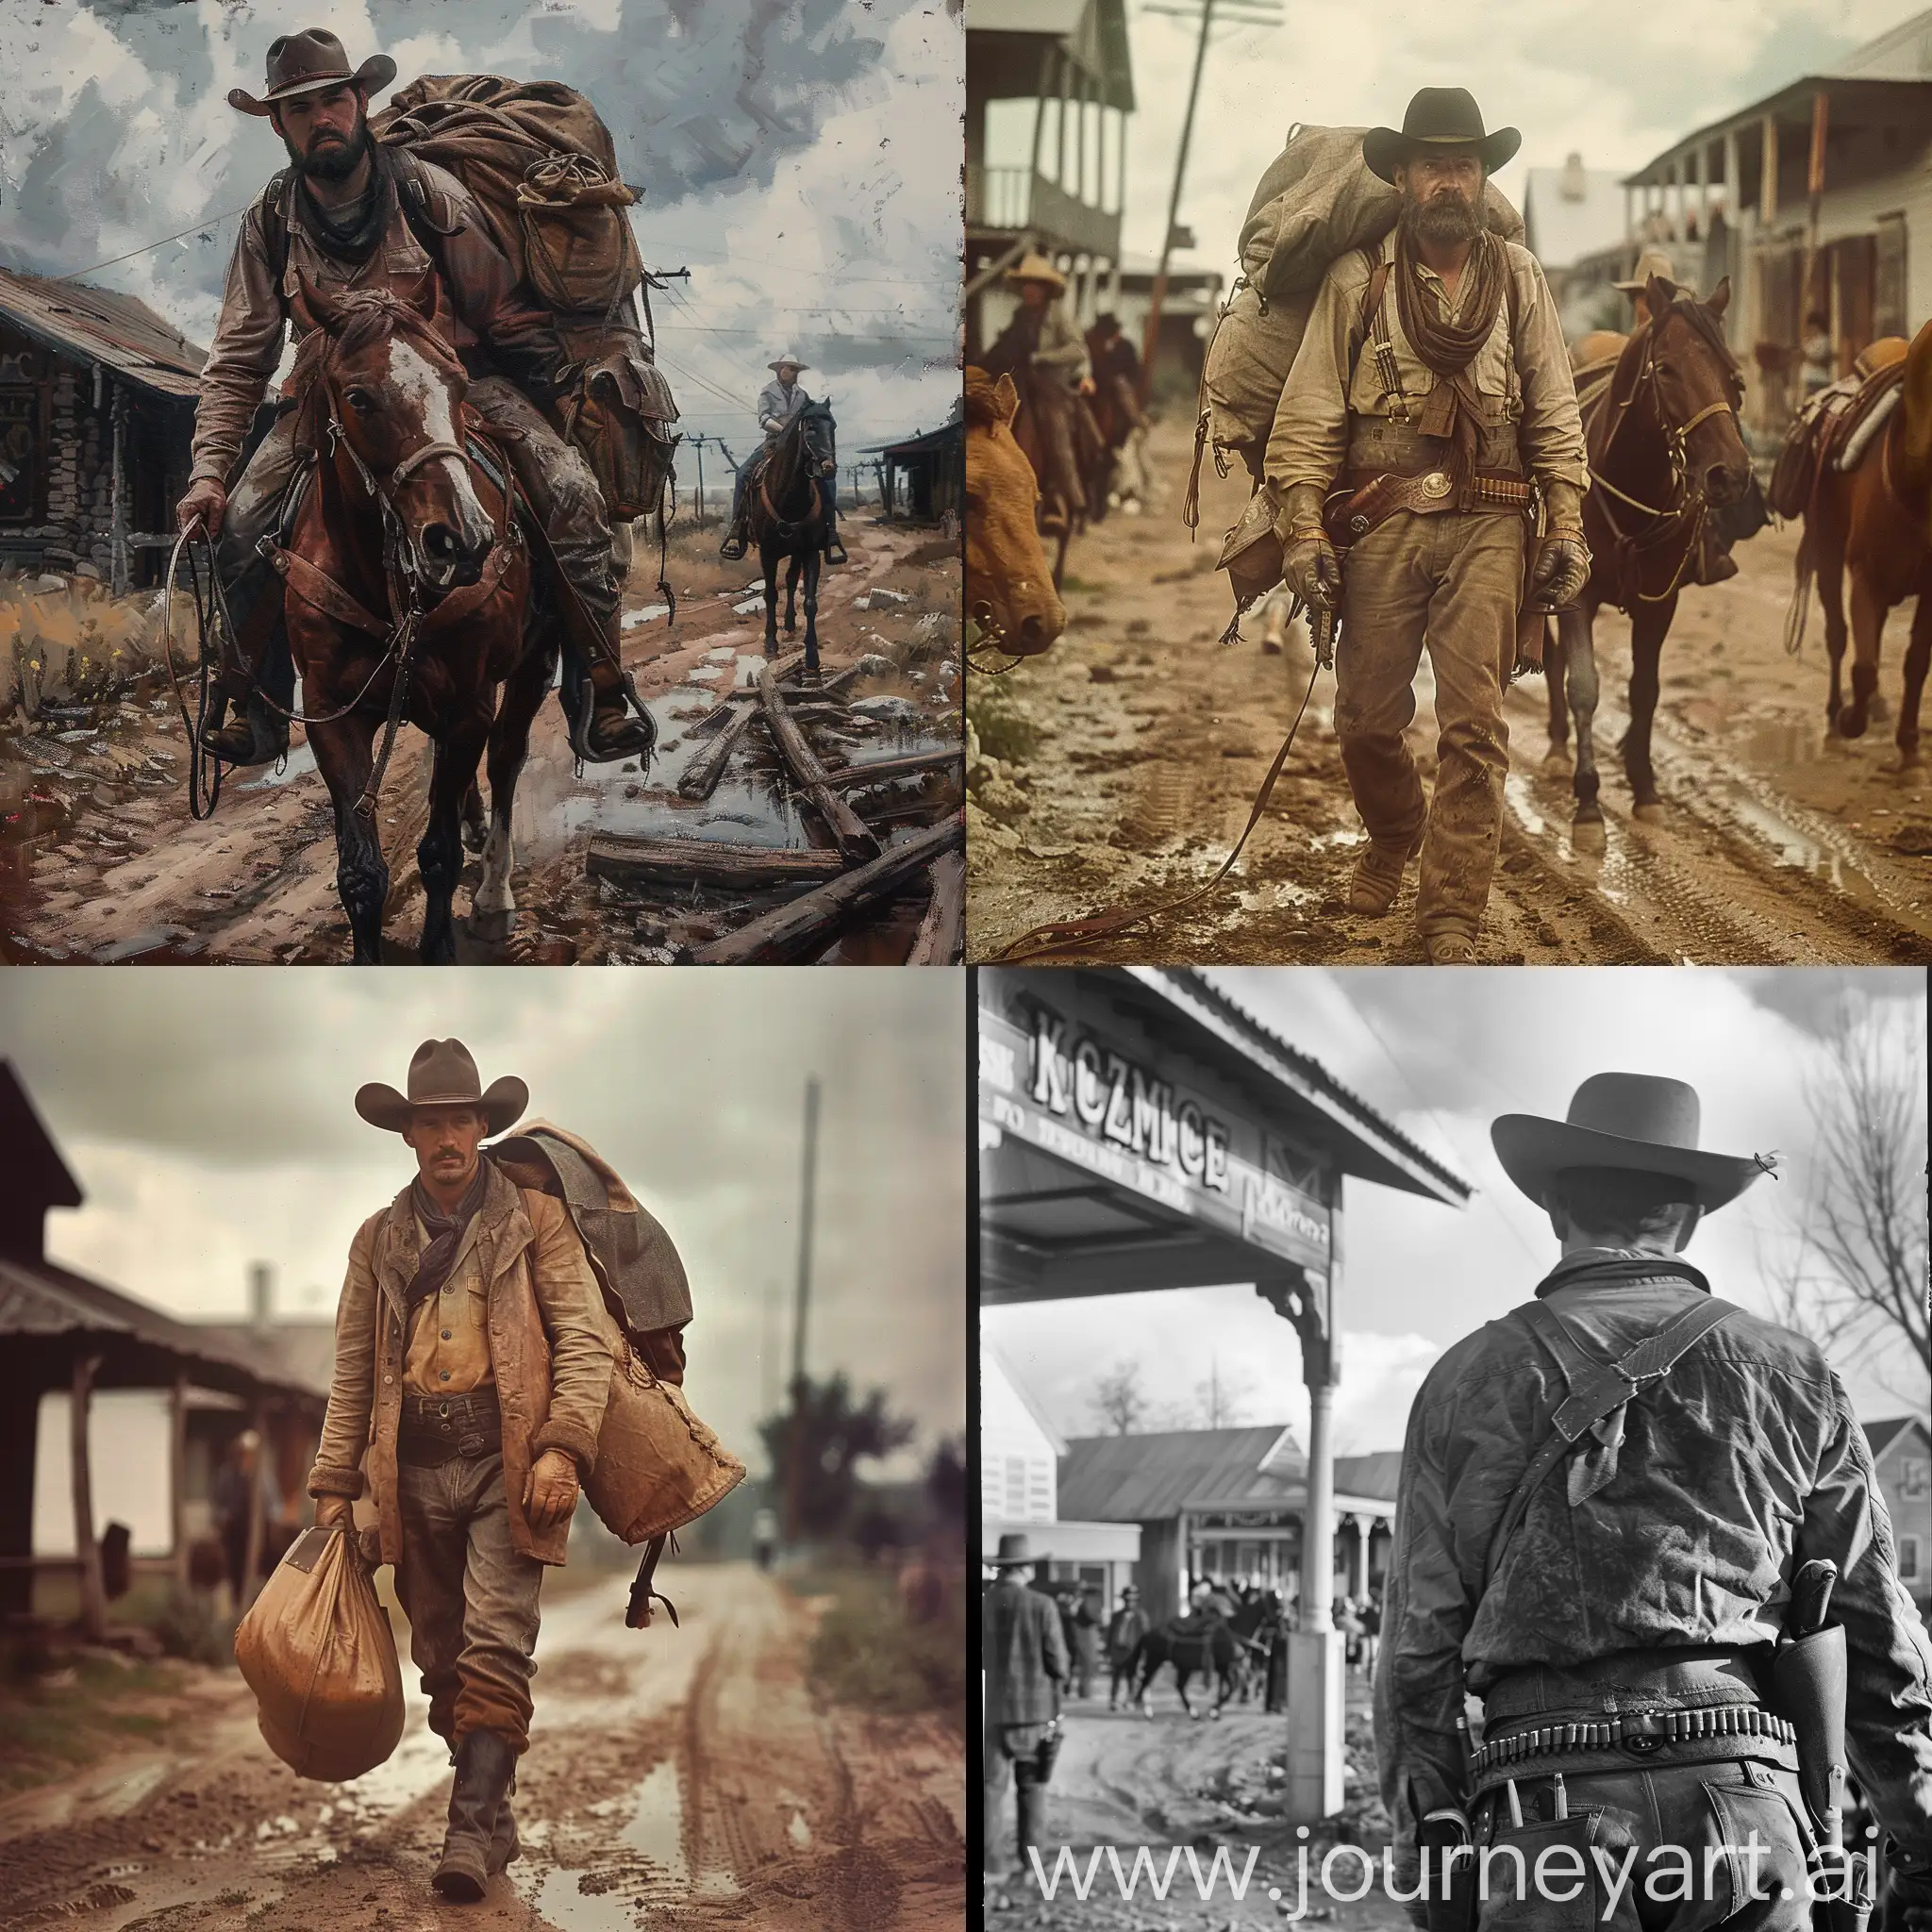 texas cowboy arriving at the town named Kozmice
